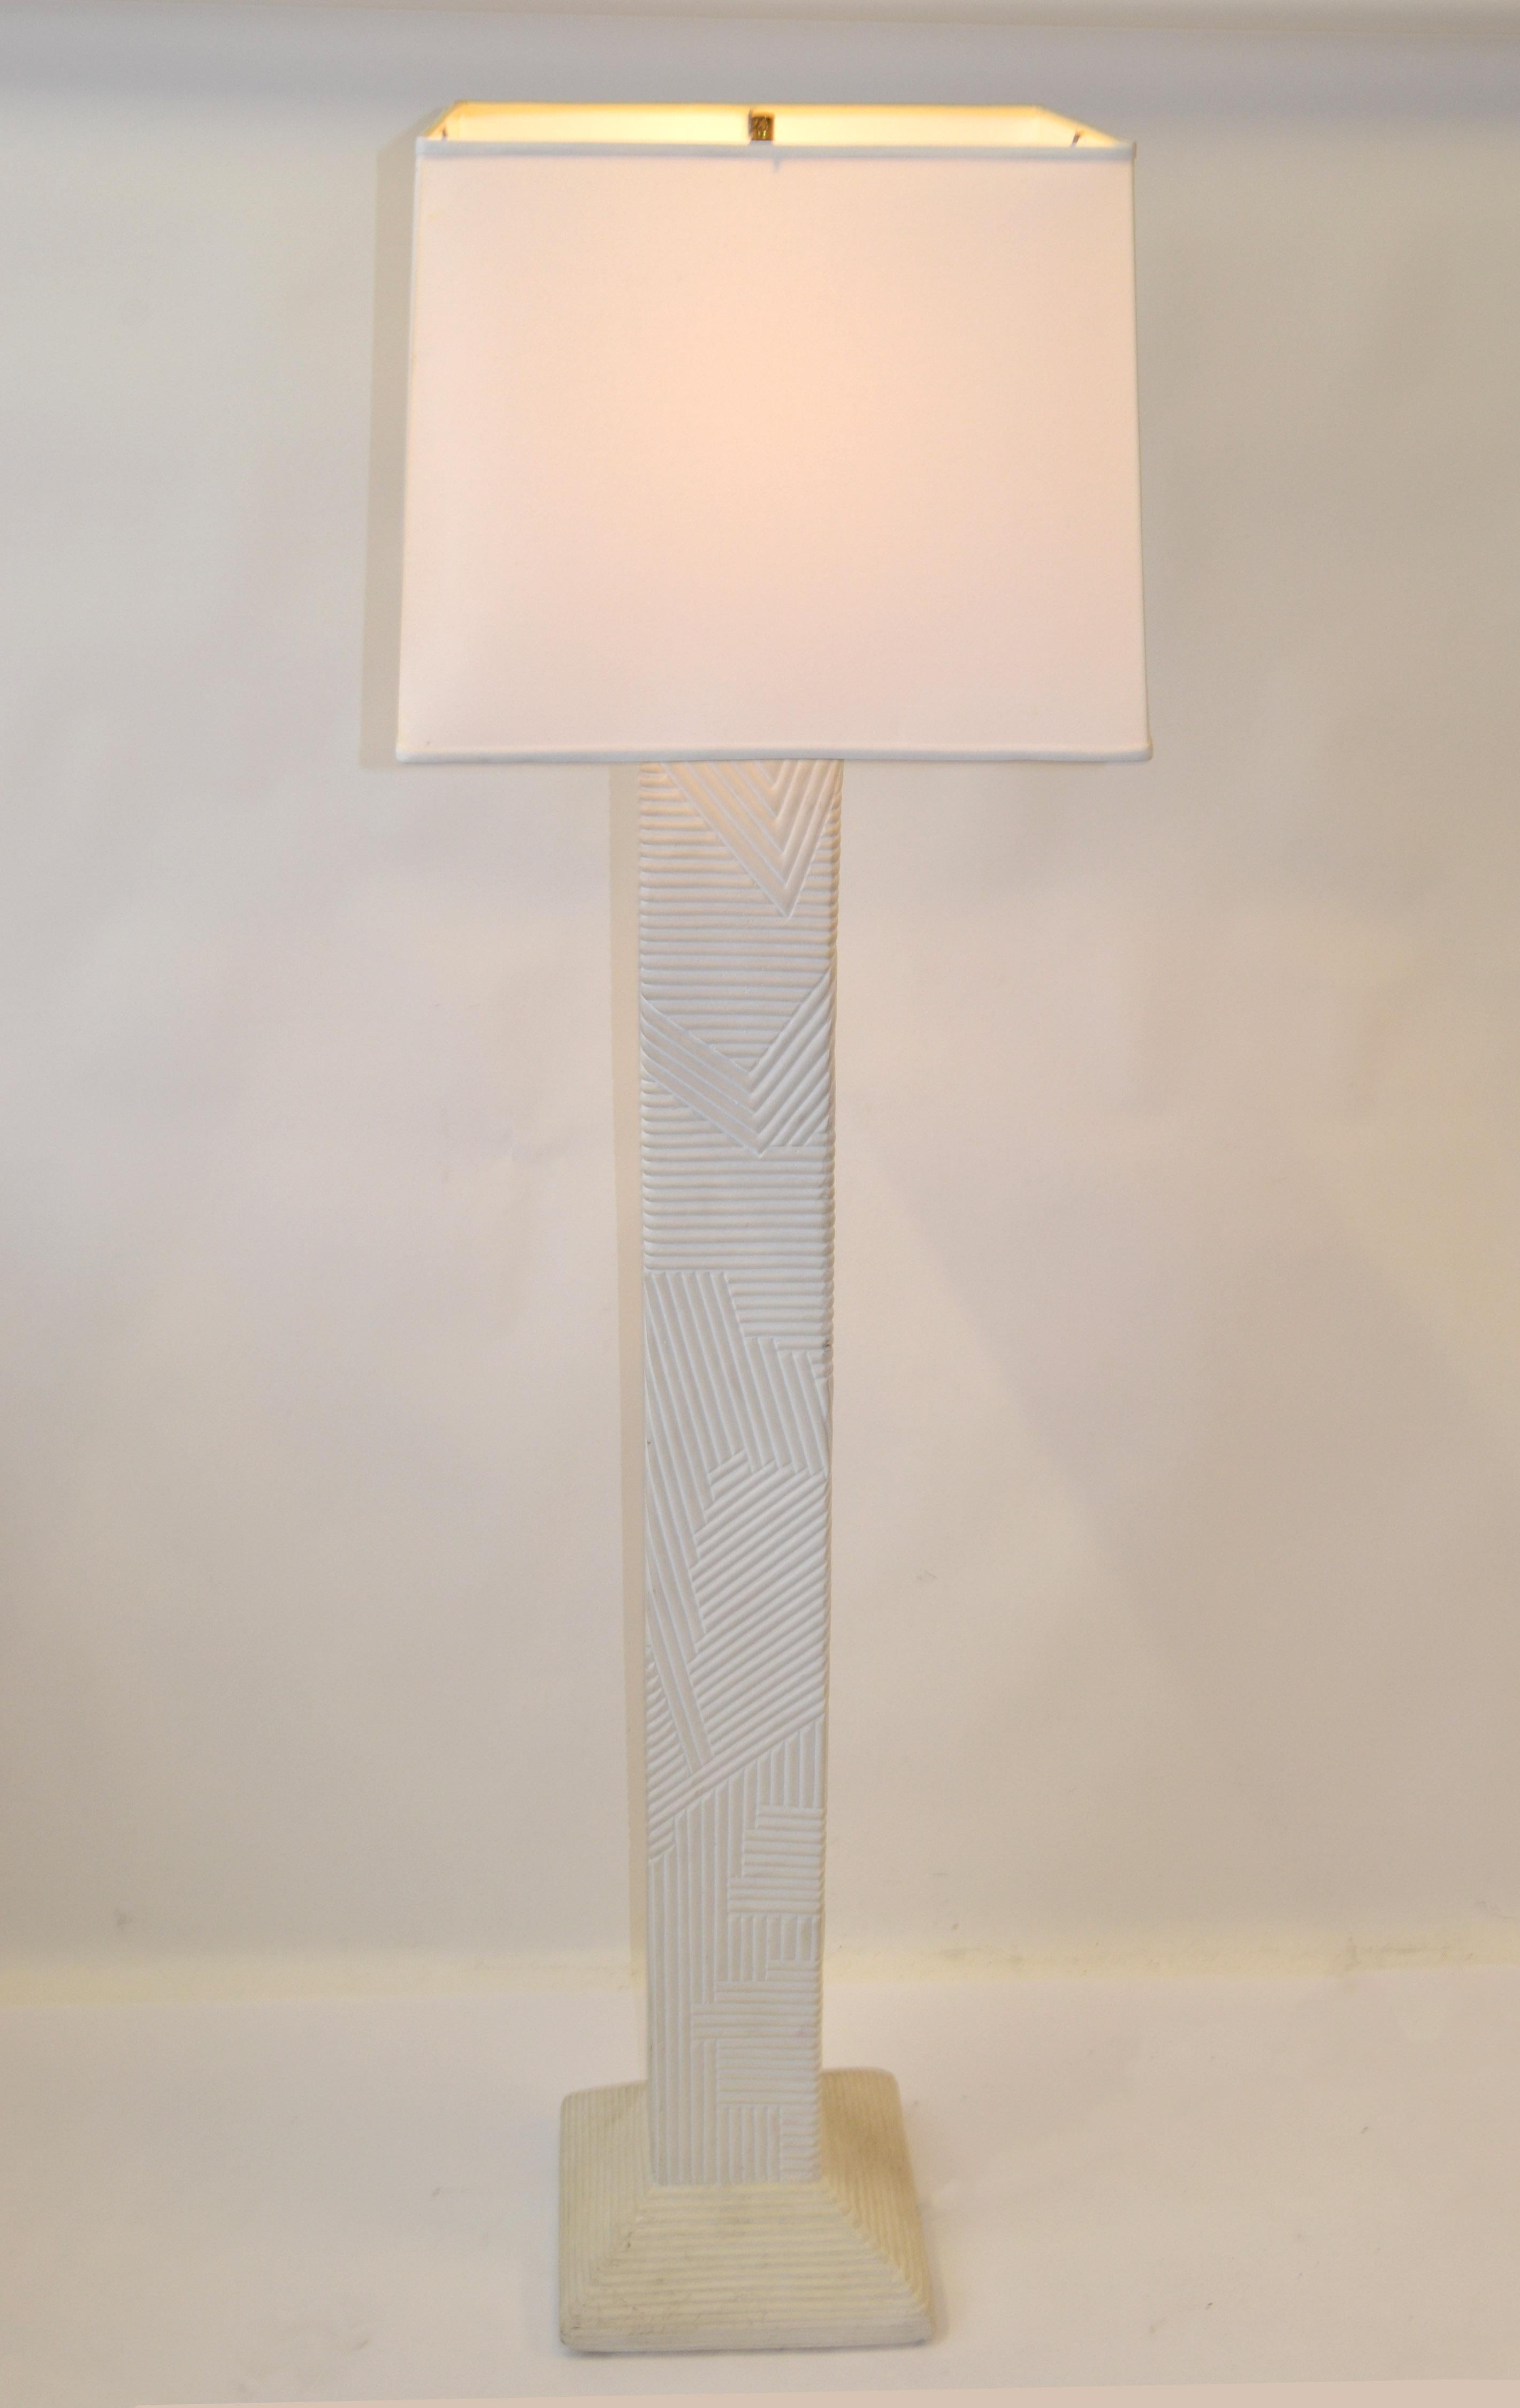 Mid-Century Modern Sirmos attributed tall floor lamp in geometric textured rectangle Plaster Core, with a brass neck finish.
Lamp is supported by a square base, same finish as the lamp.
Sirmos was a Manufacture of high-end artisanal lighting to